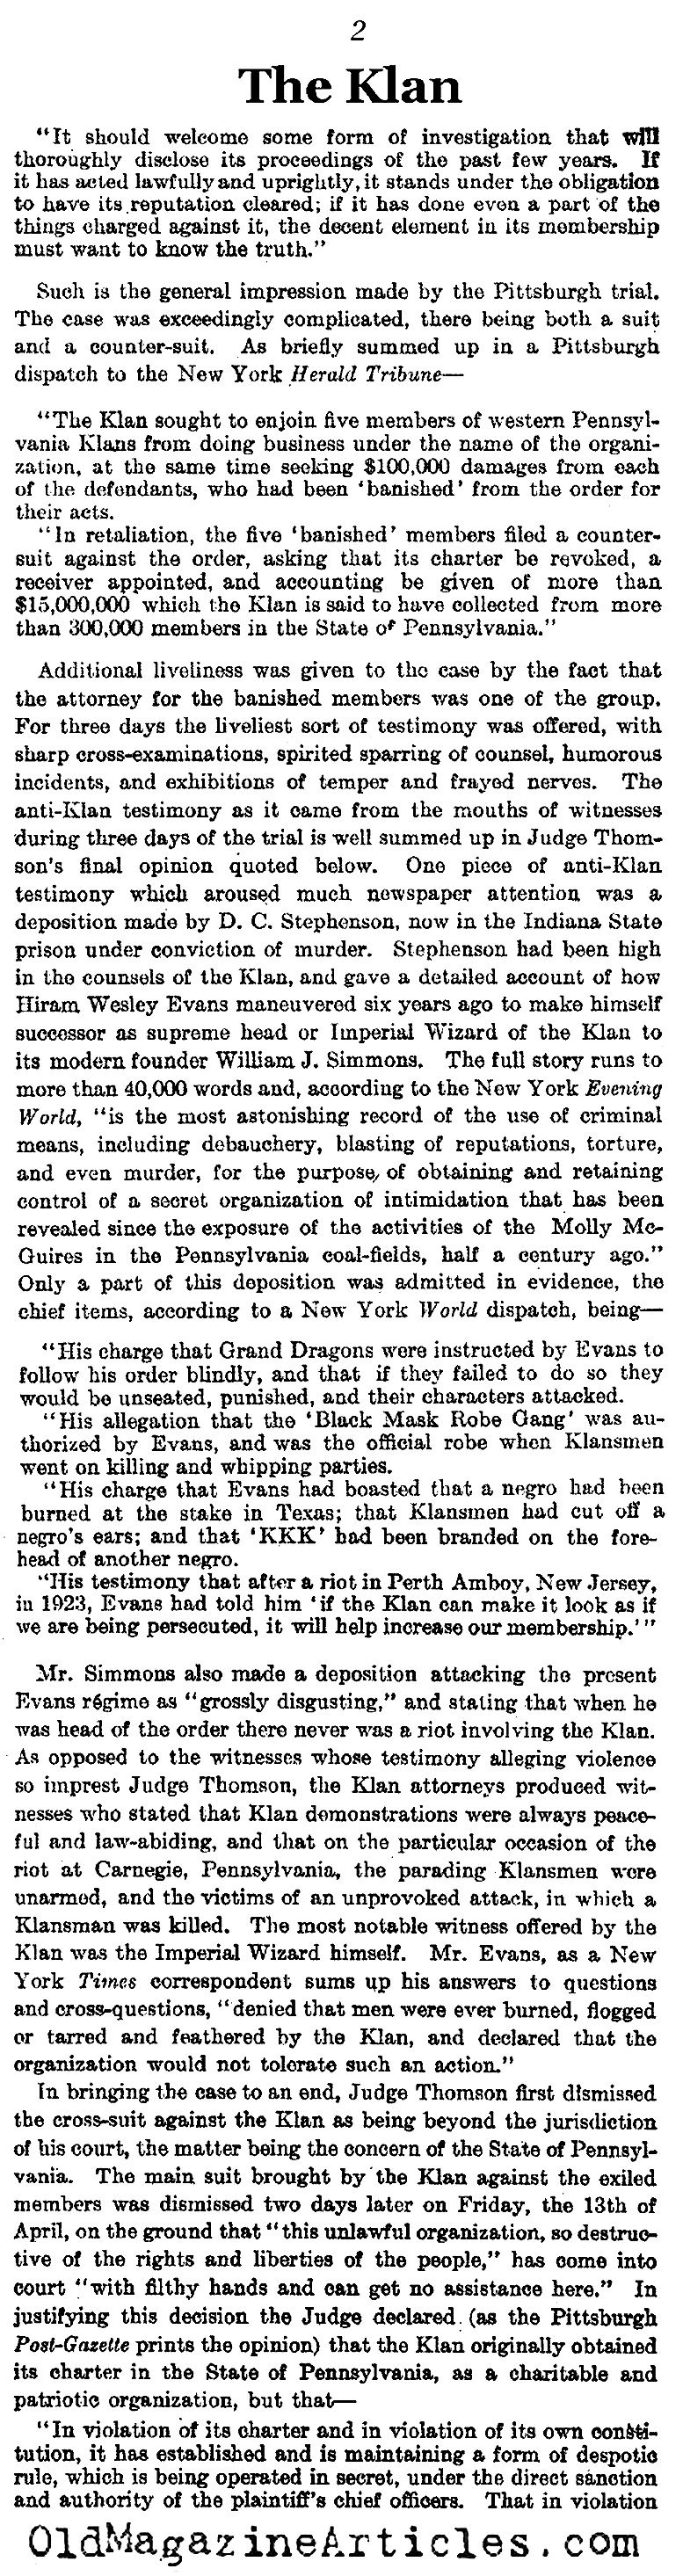 The KKK in Federal Court  (The Literary Digest, 1928)